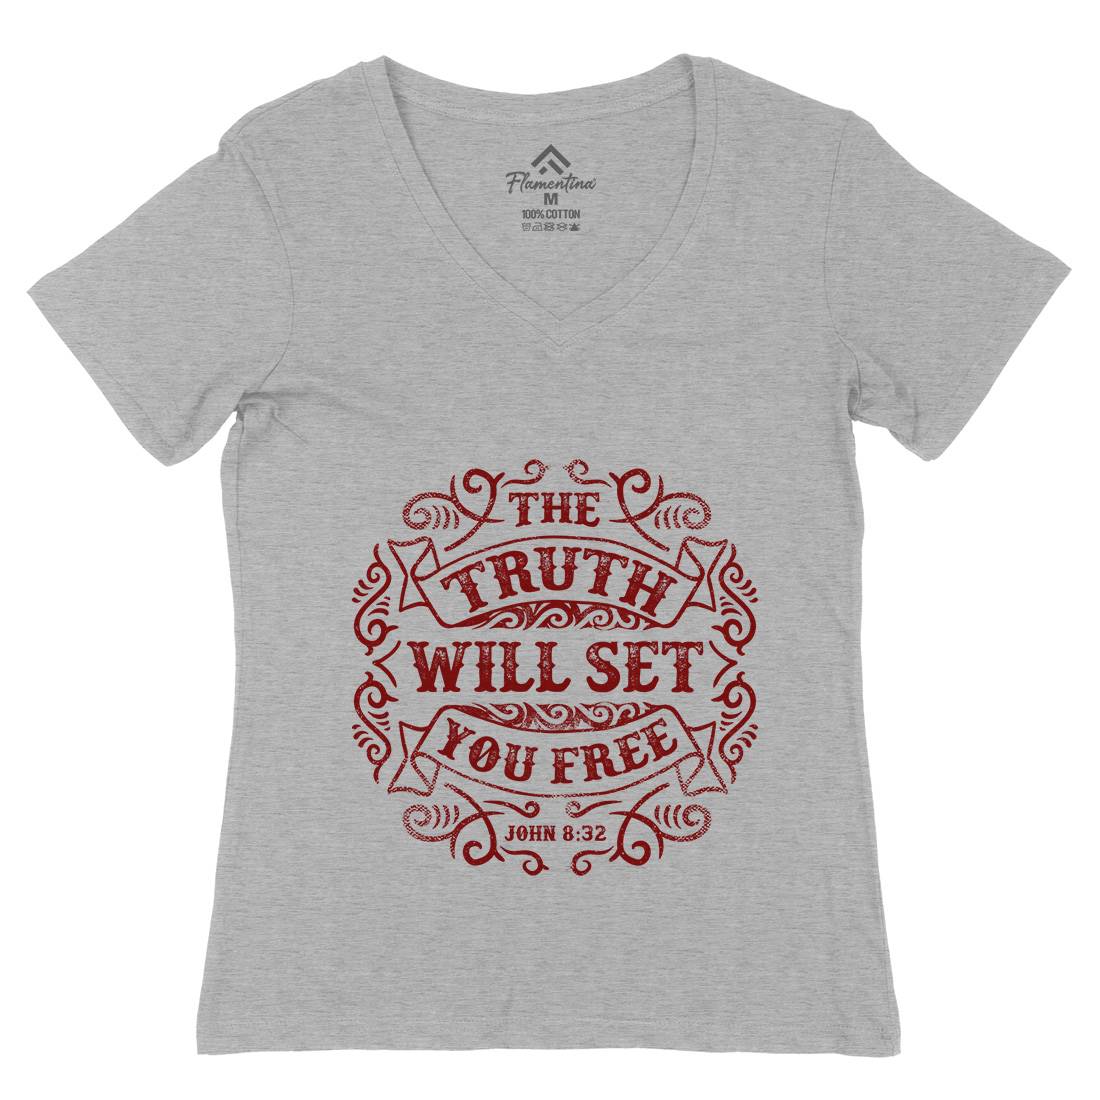 The Truth Will Set You Free Womens Organic V-Neck T-Shirt Religion C990